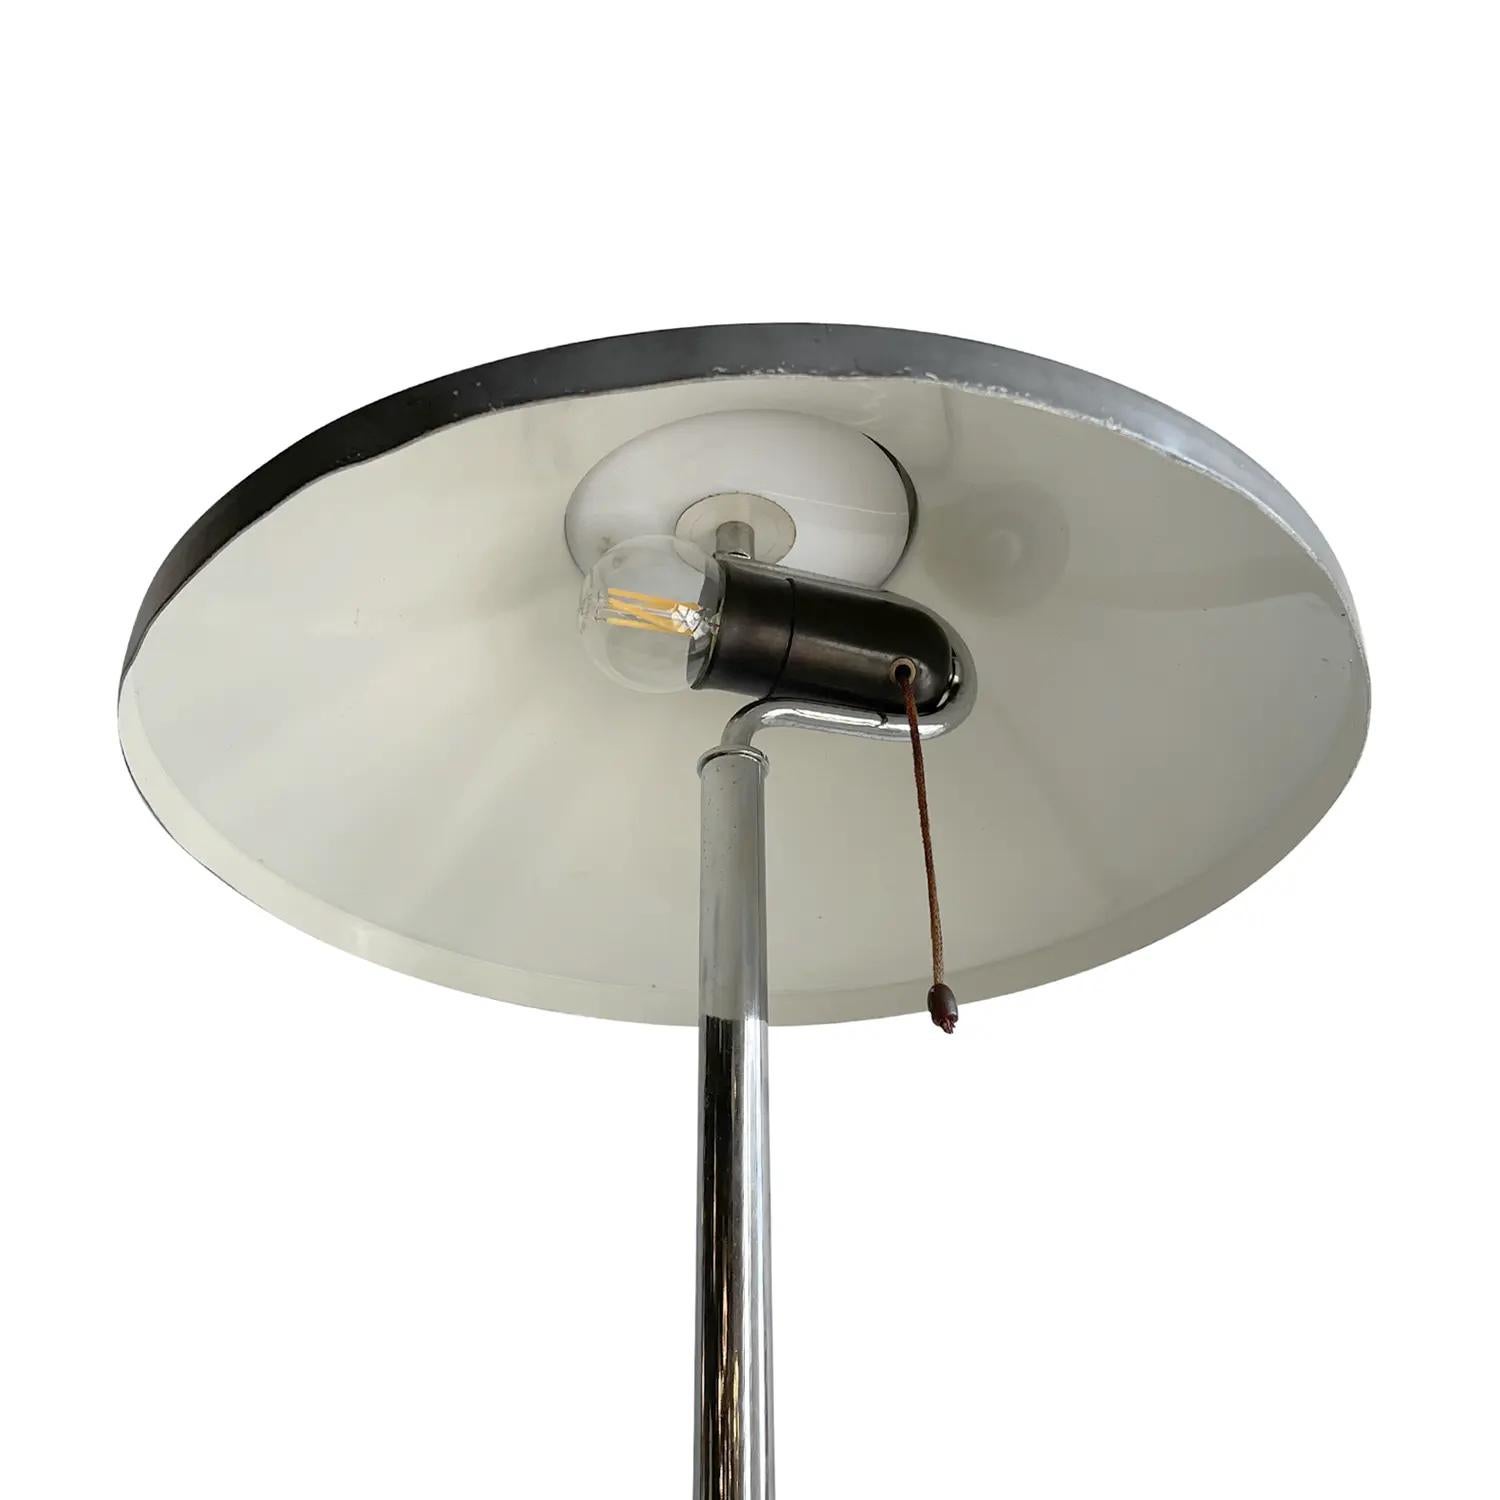 20th Century Swedish Chrome Table Lamp, Scandinavian Desk Light by Falkenberg In Good Condition For Sale In West Palm Beach, FL